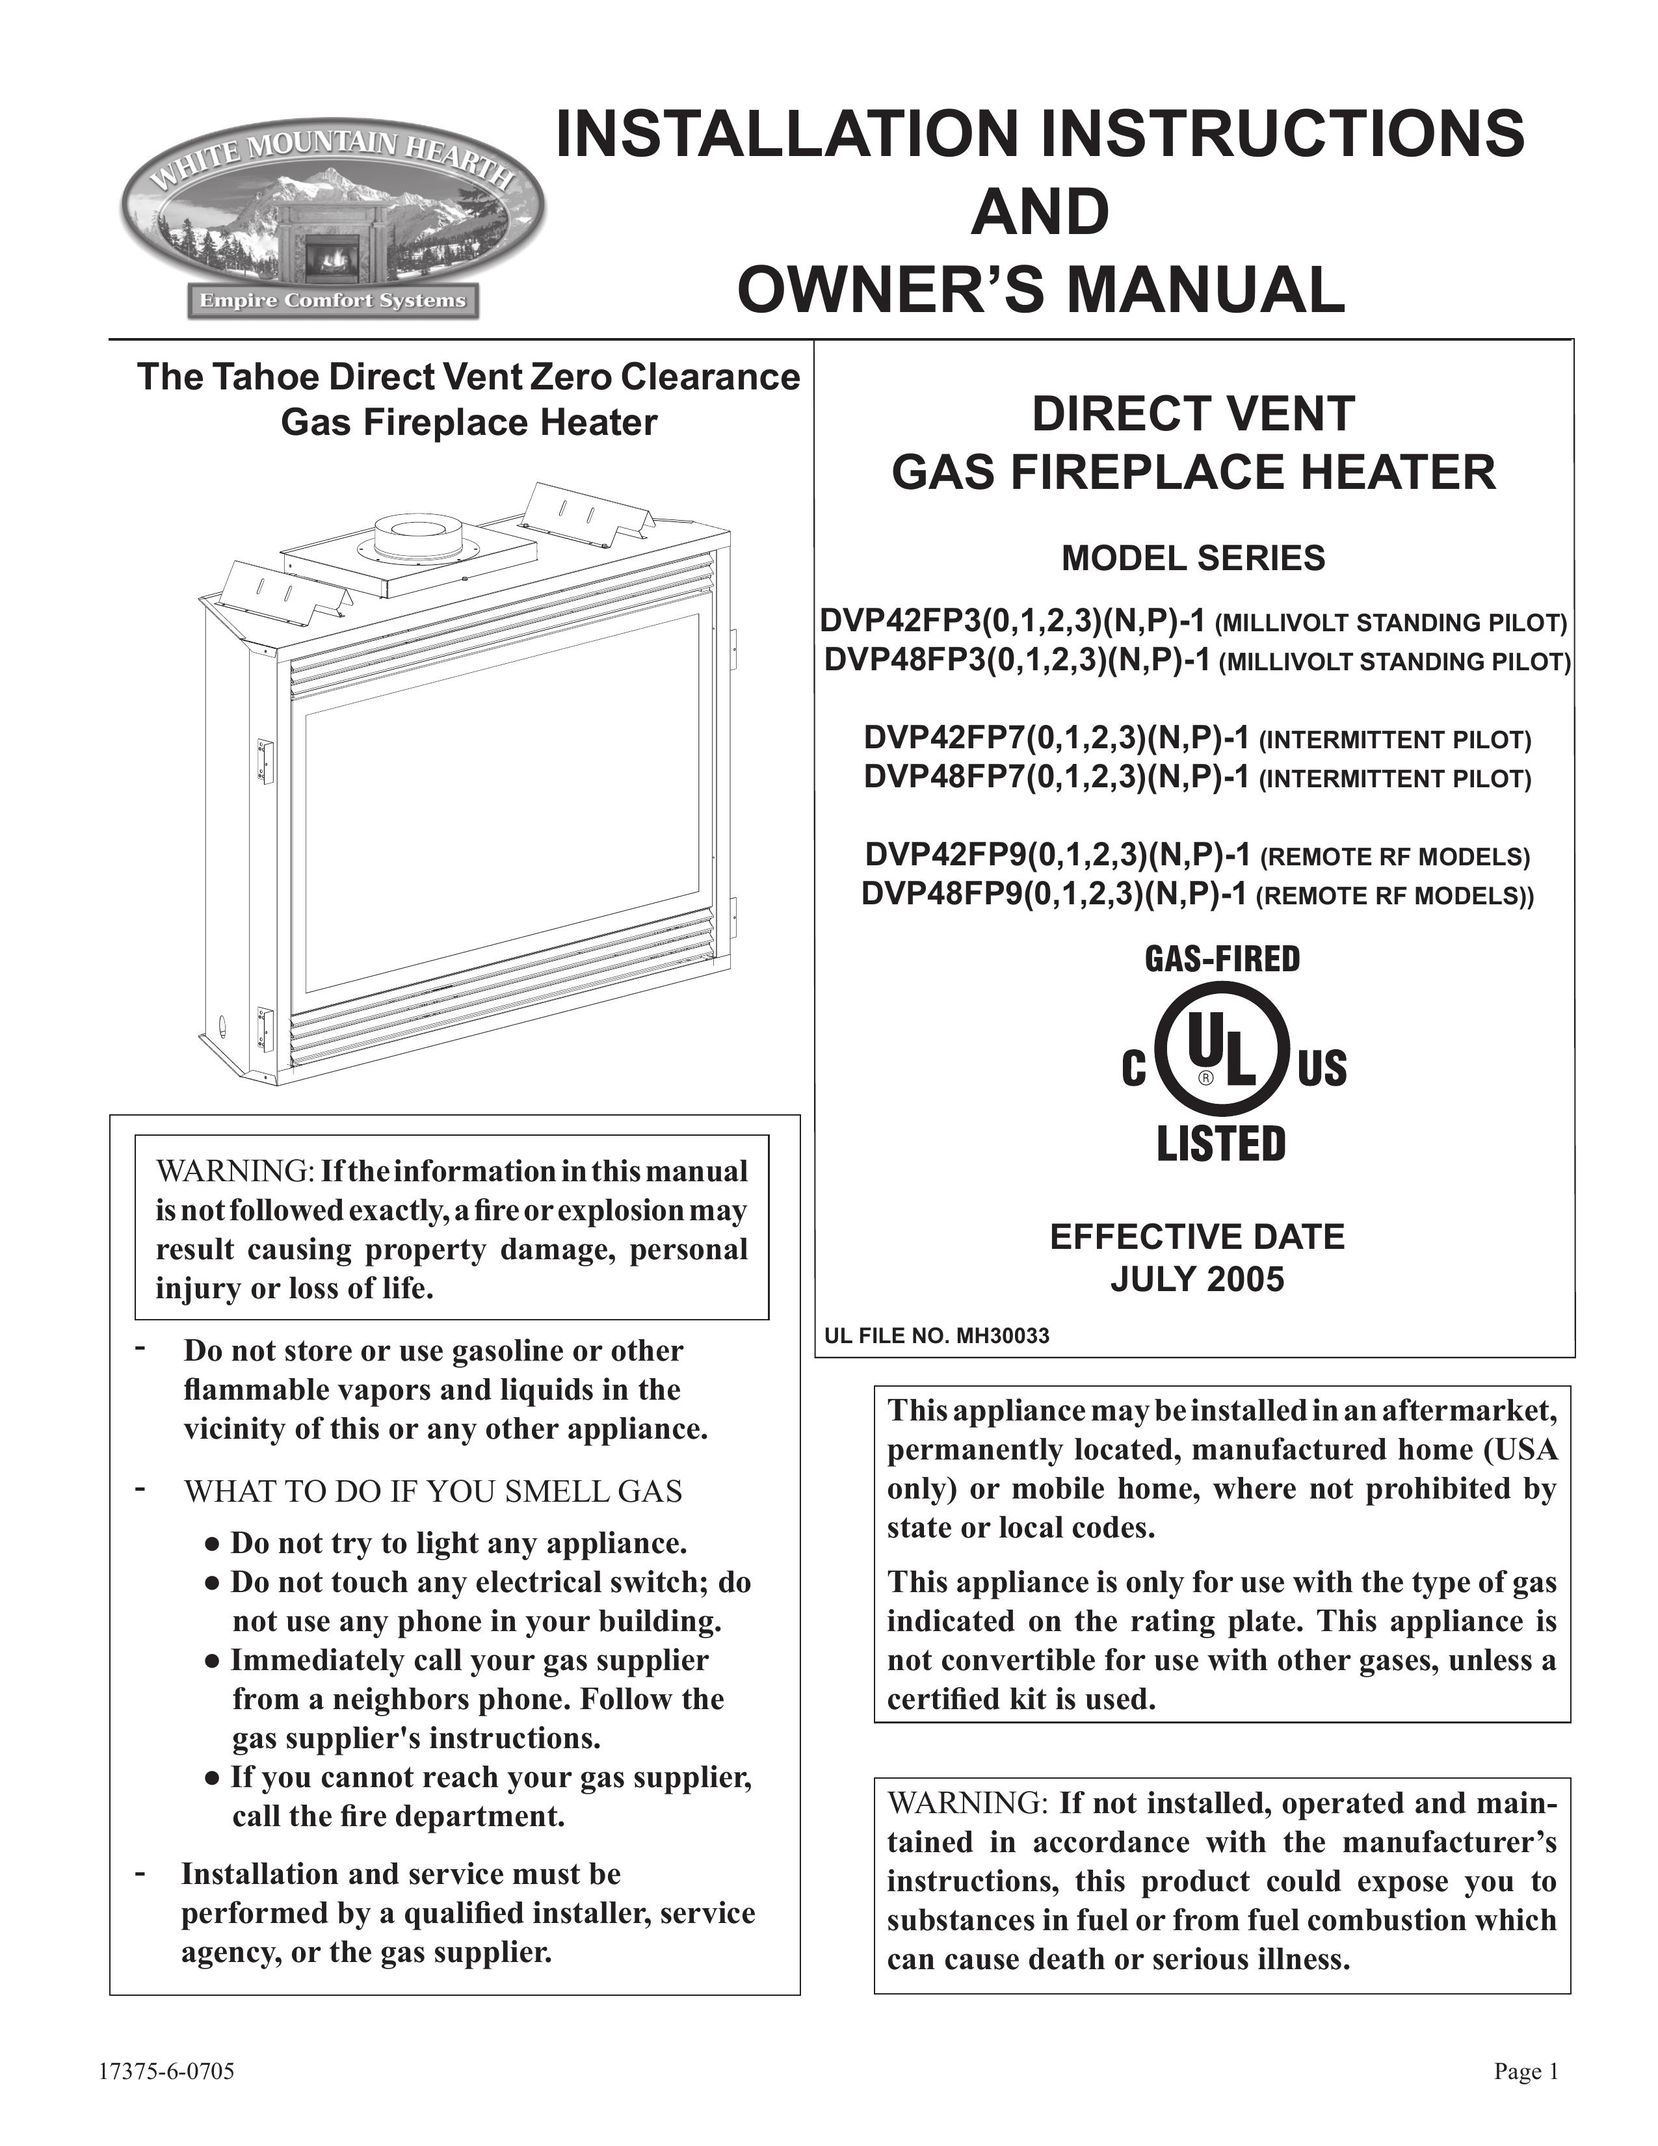 Empire Comfort Systems DVP48FP7 Water Heater User Manual